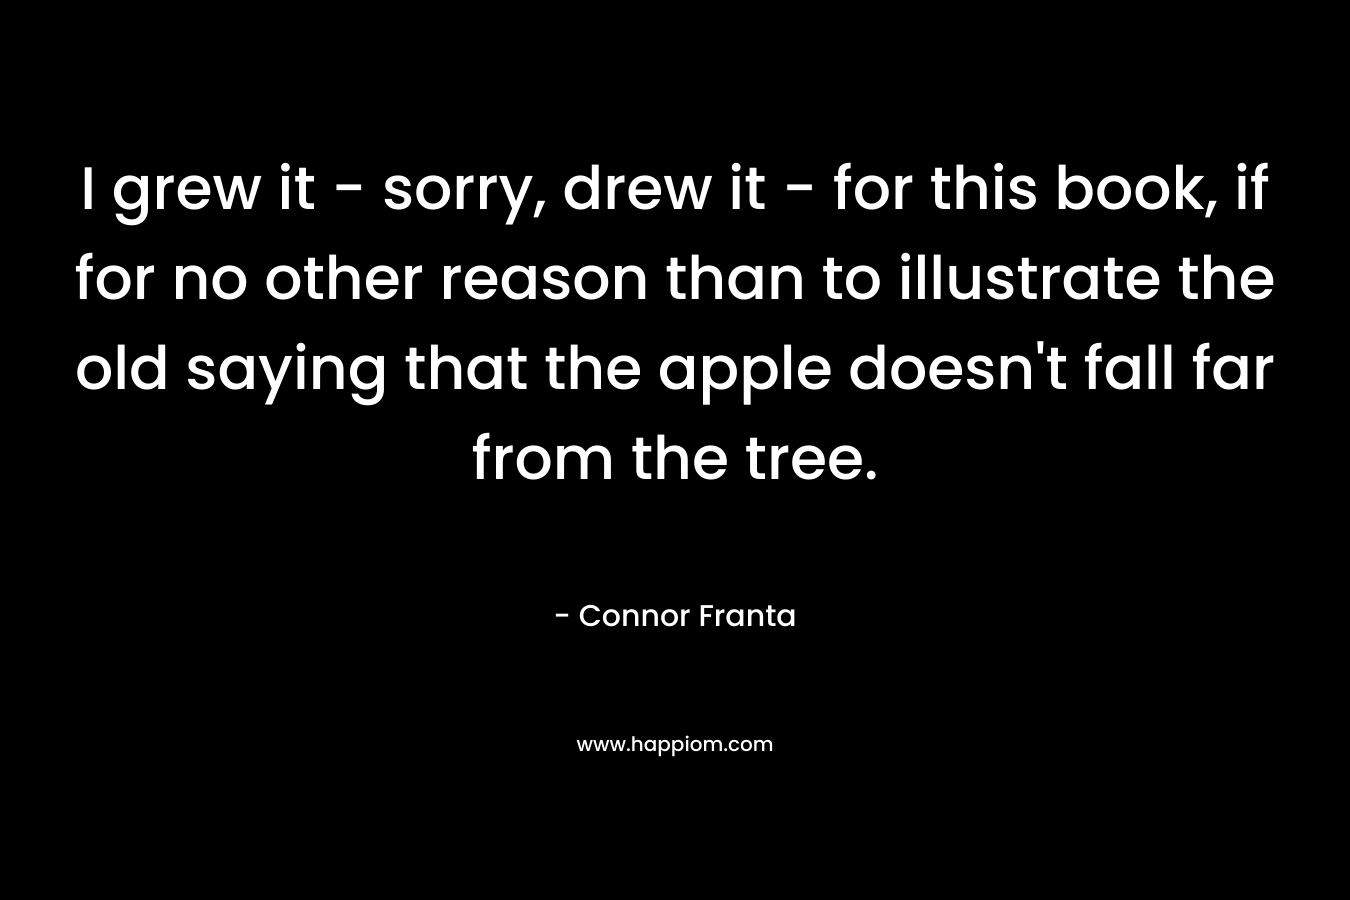 I grew it – sorry, drew it – for this book, if for no other reason than to illustrate the old saying that the apple doesn’t fall far from the tree. – Connor Franta